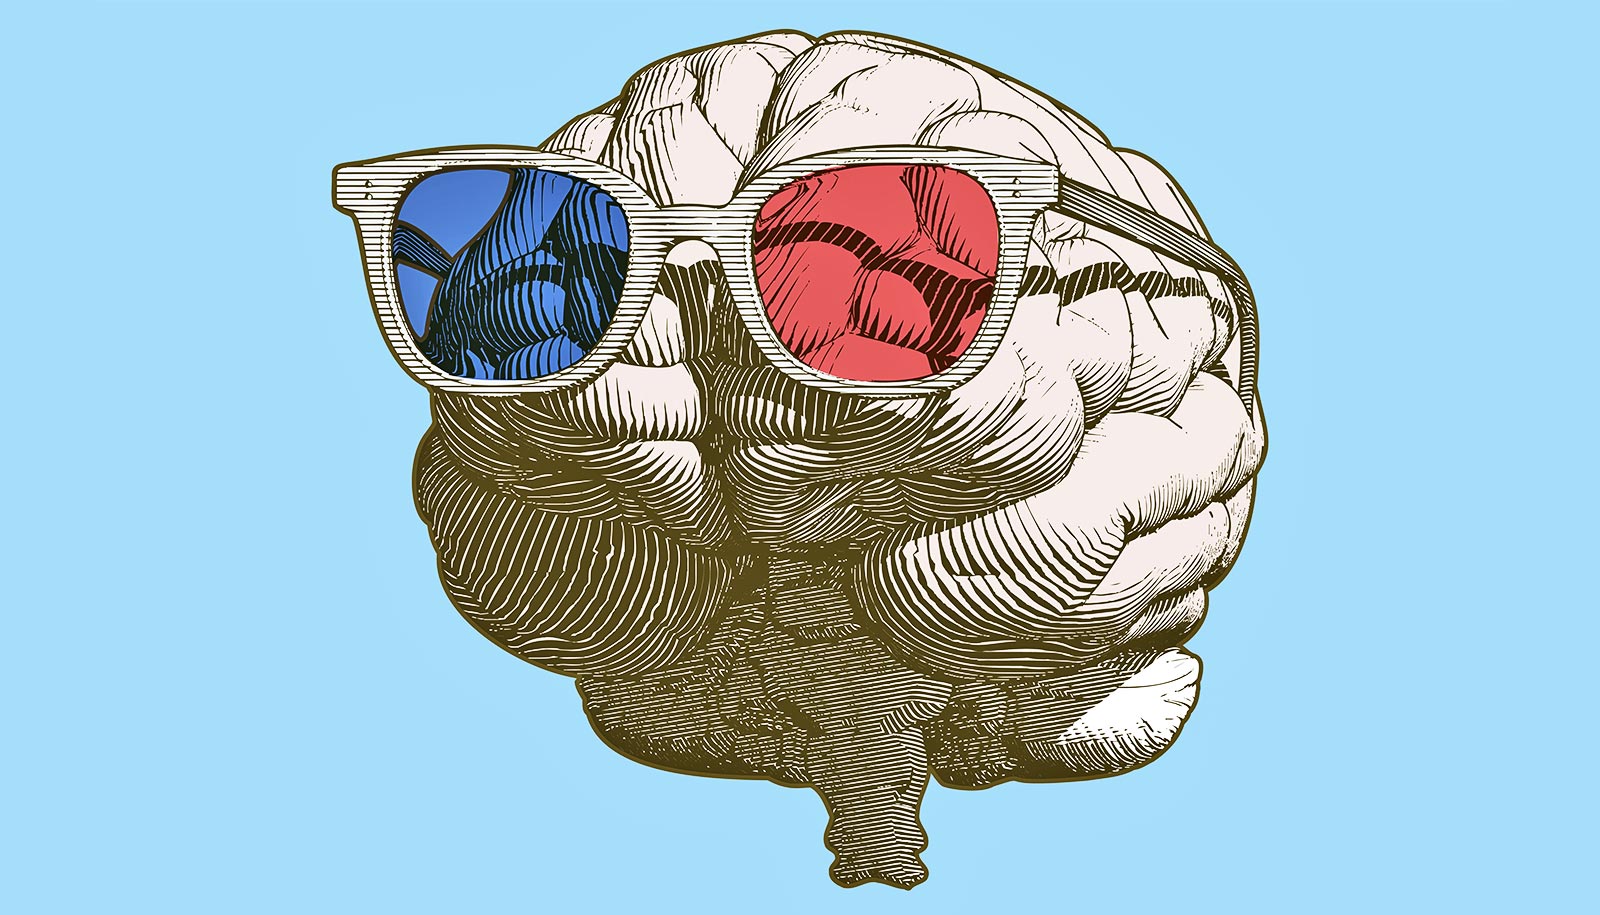 A drawing of a brain wearing glasses with one red lens and one blue lens.